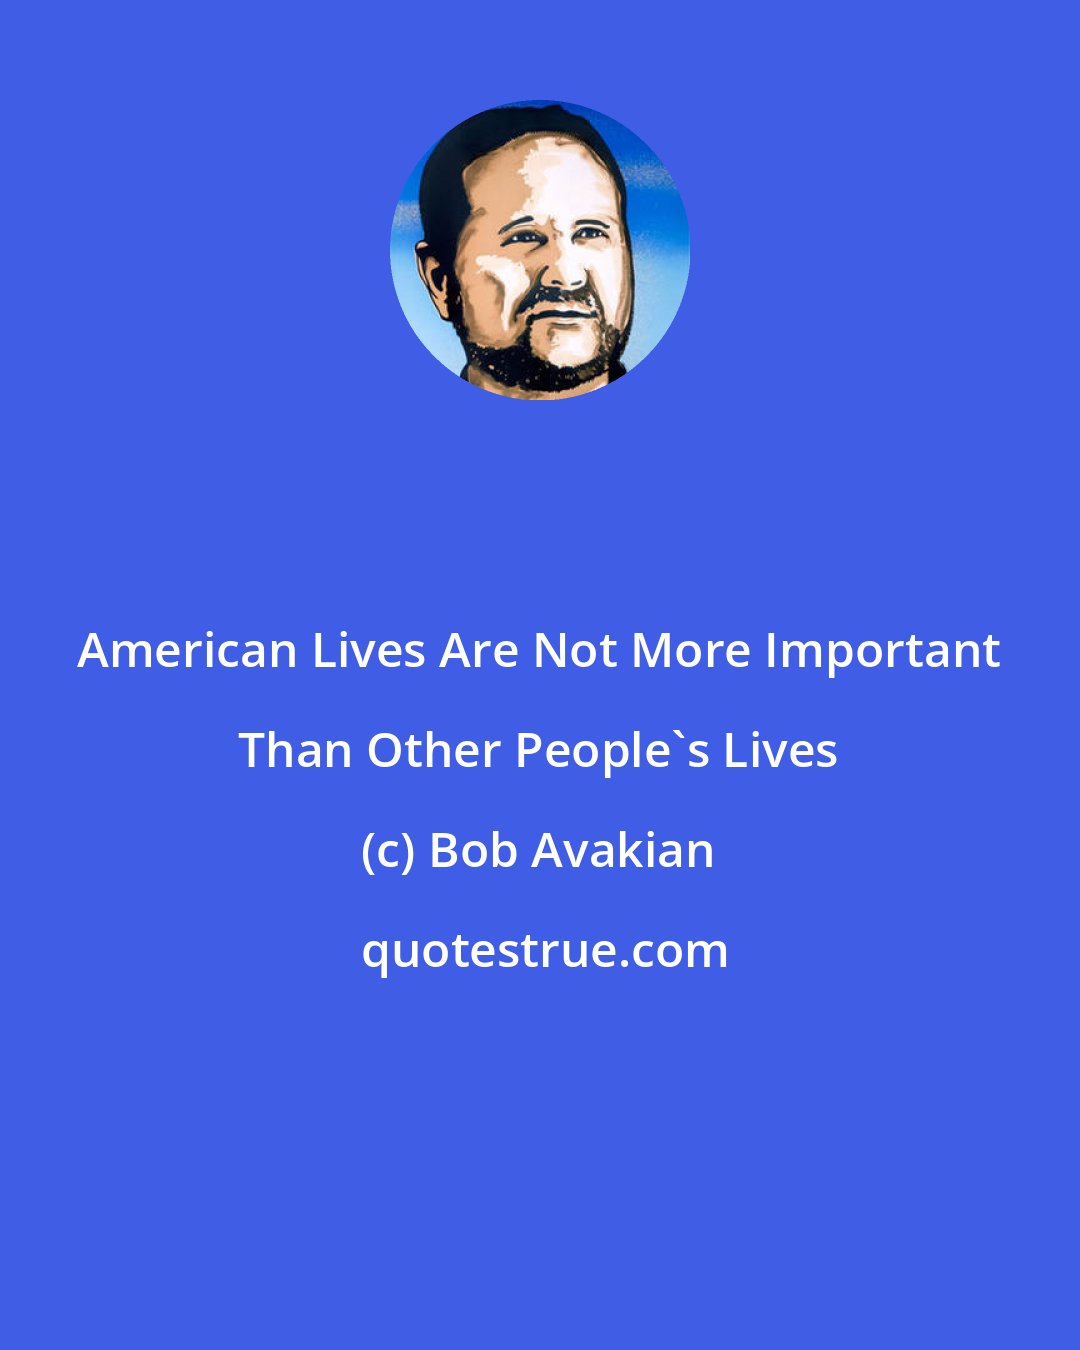 Bob Avakian: American Lives Are Not More Important Than Other People's Lives